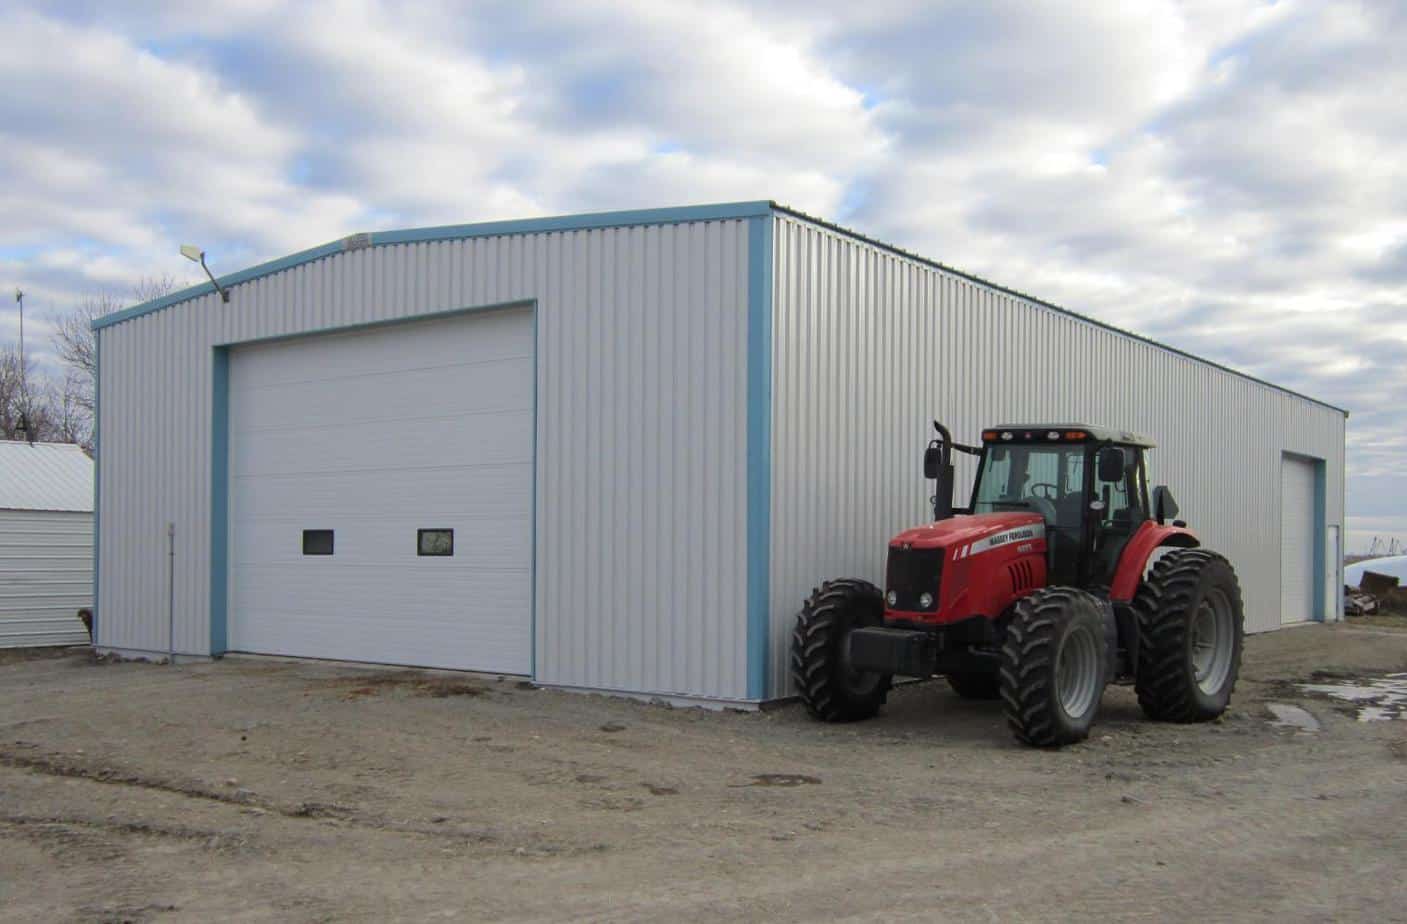 Steel Building with Tractor beside